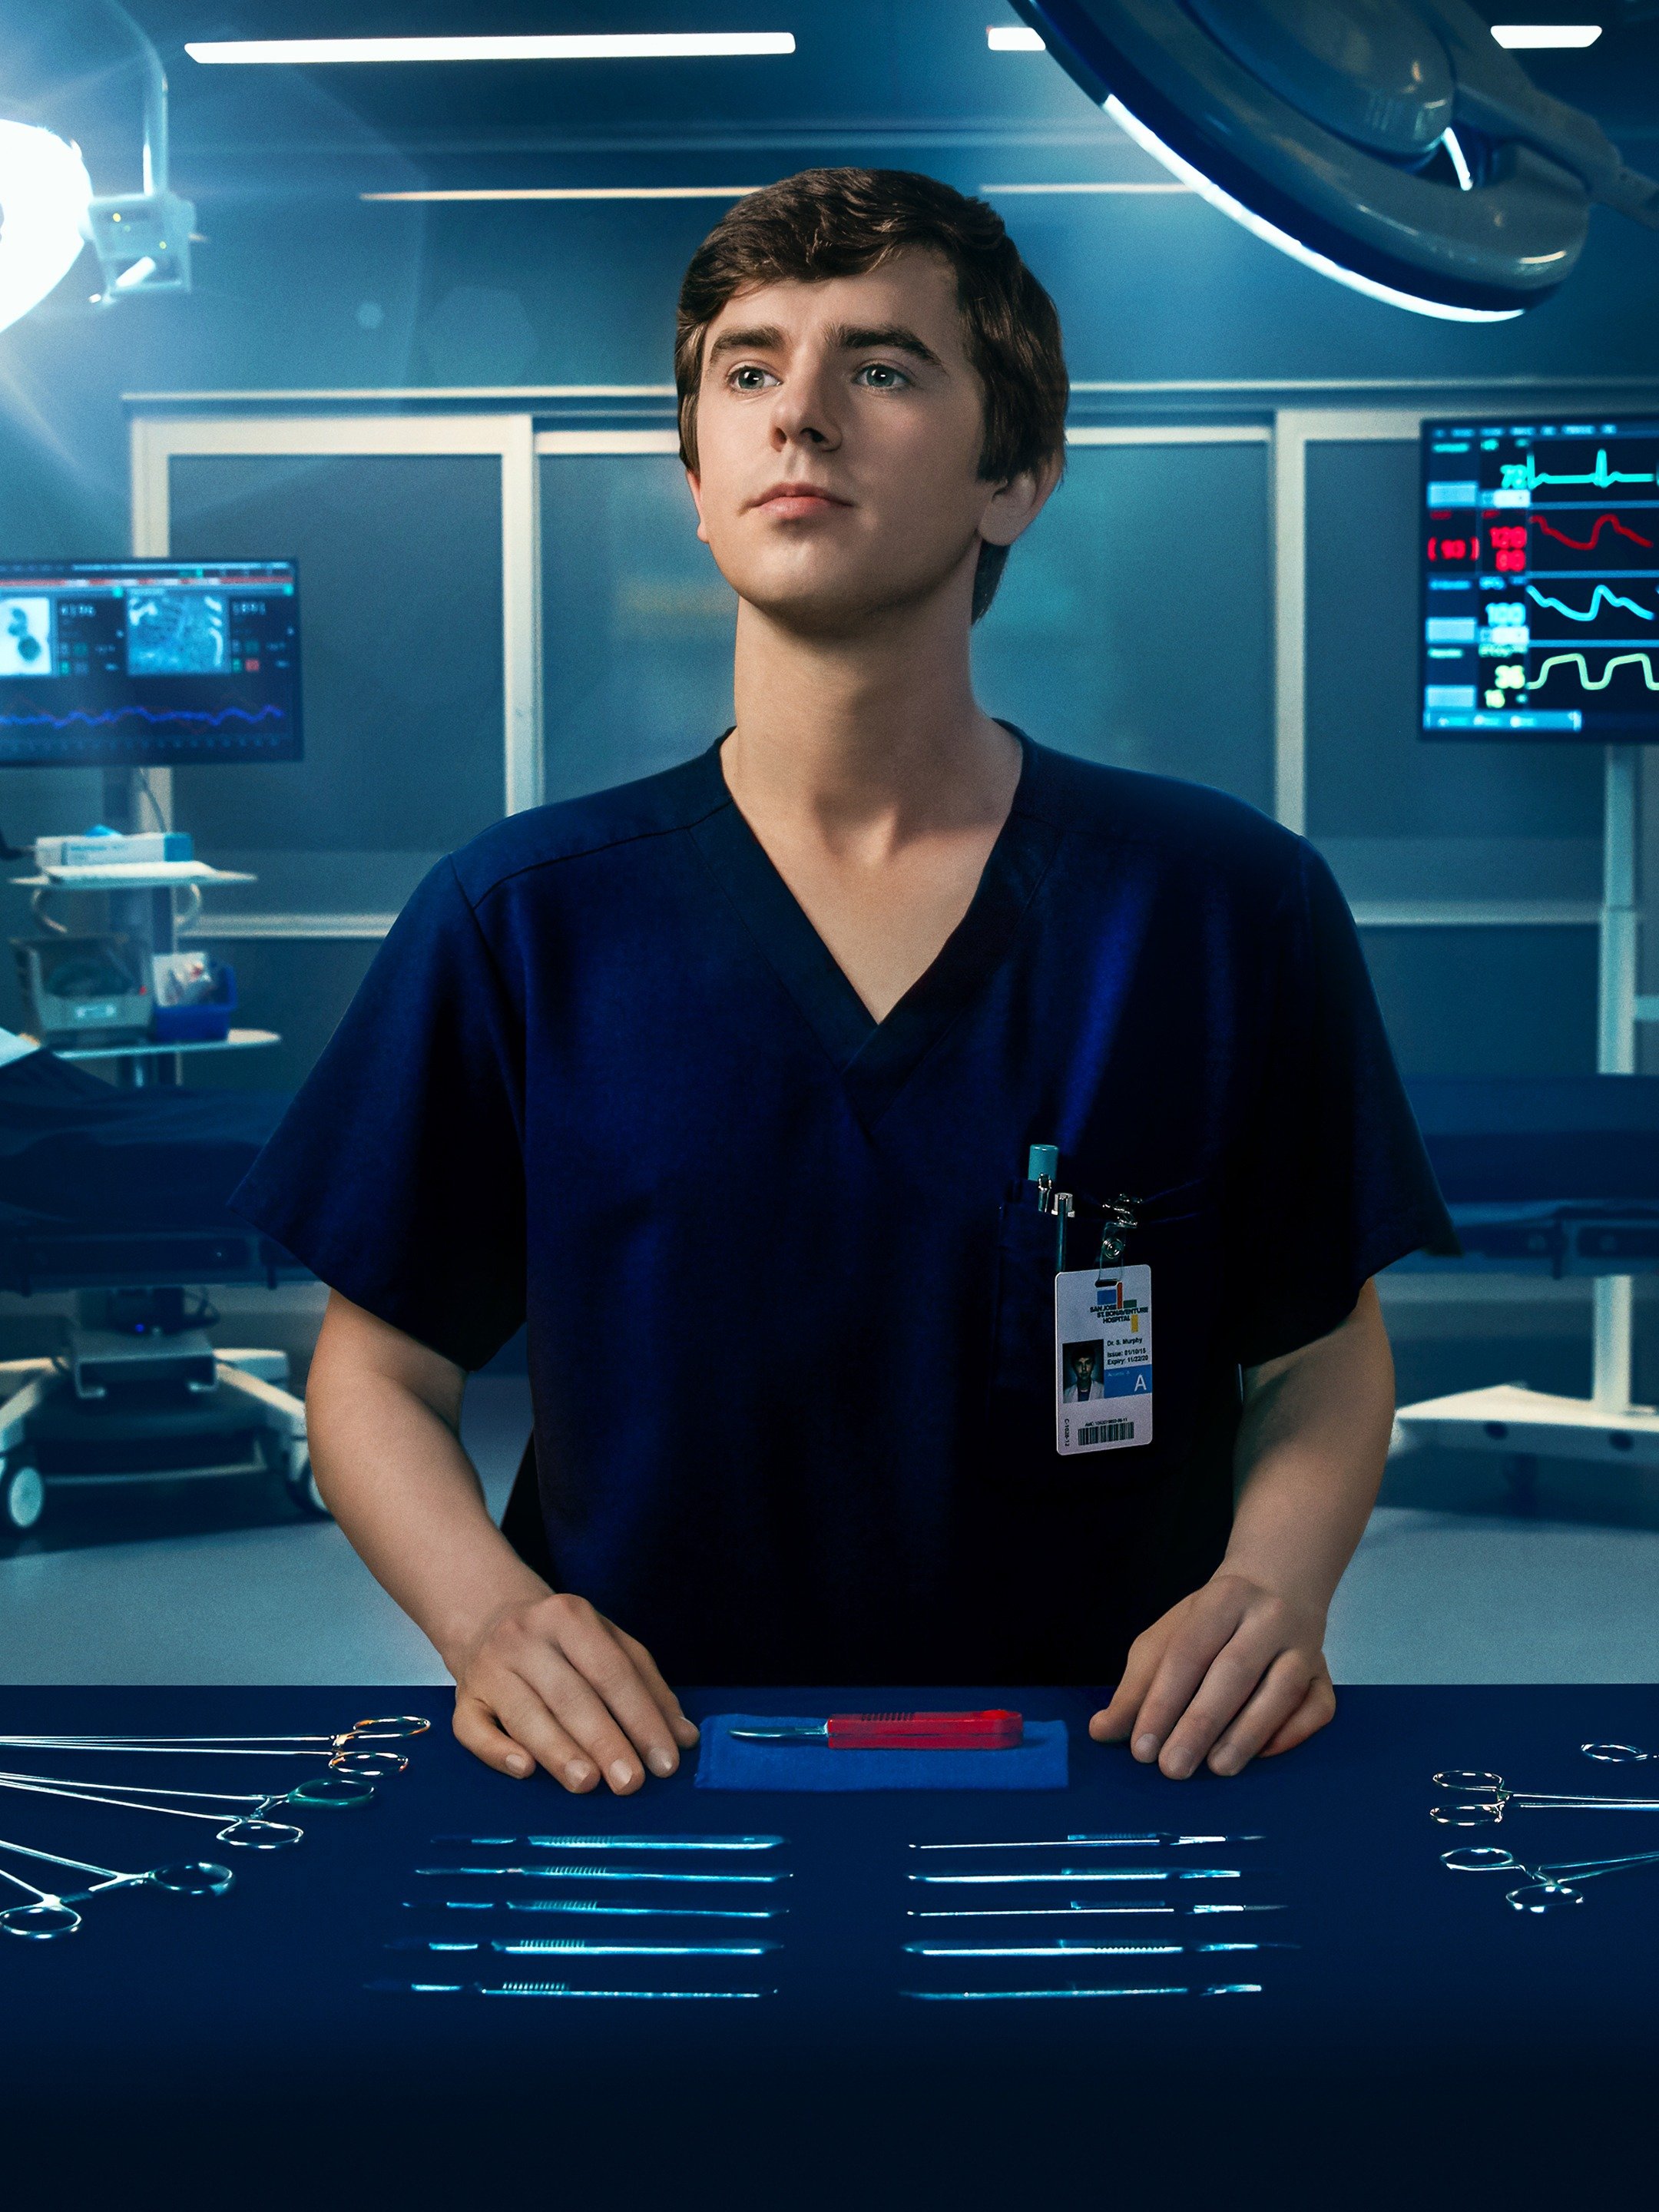 The good doctor cast